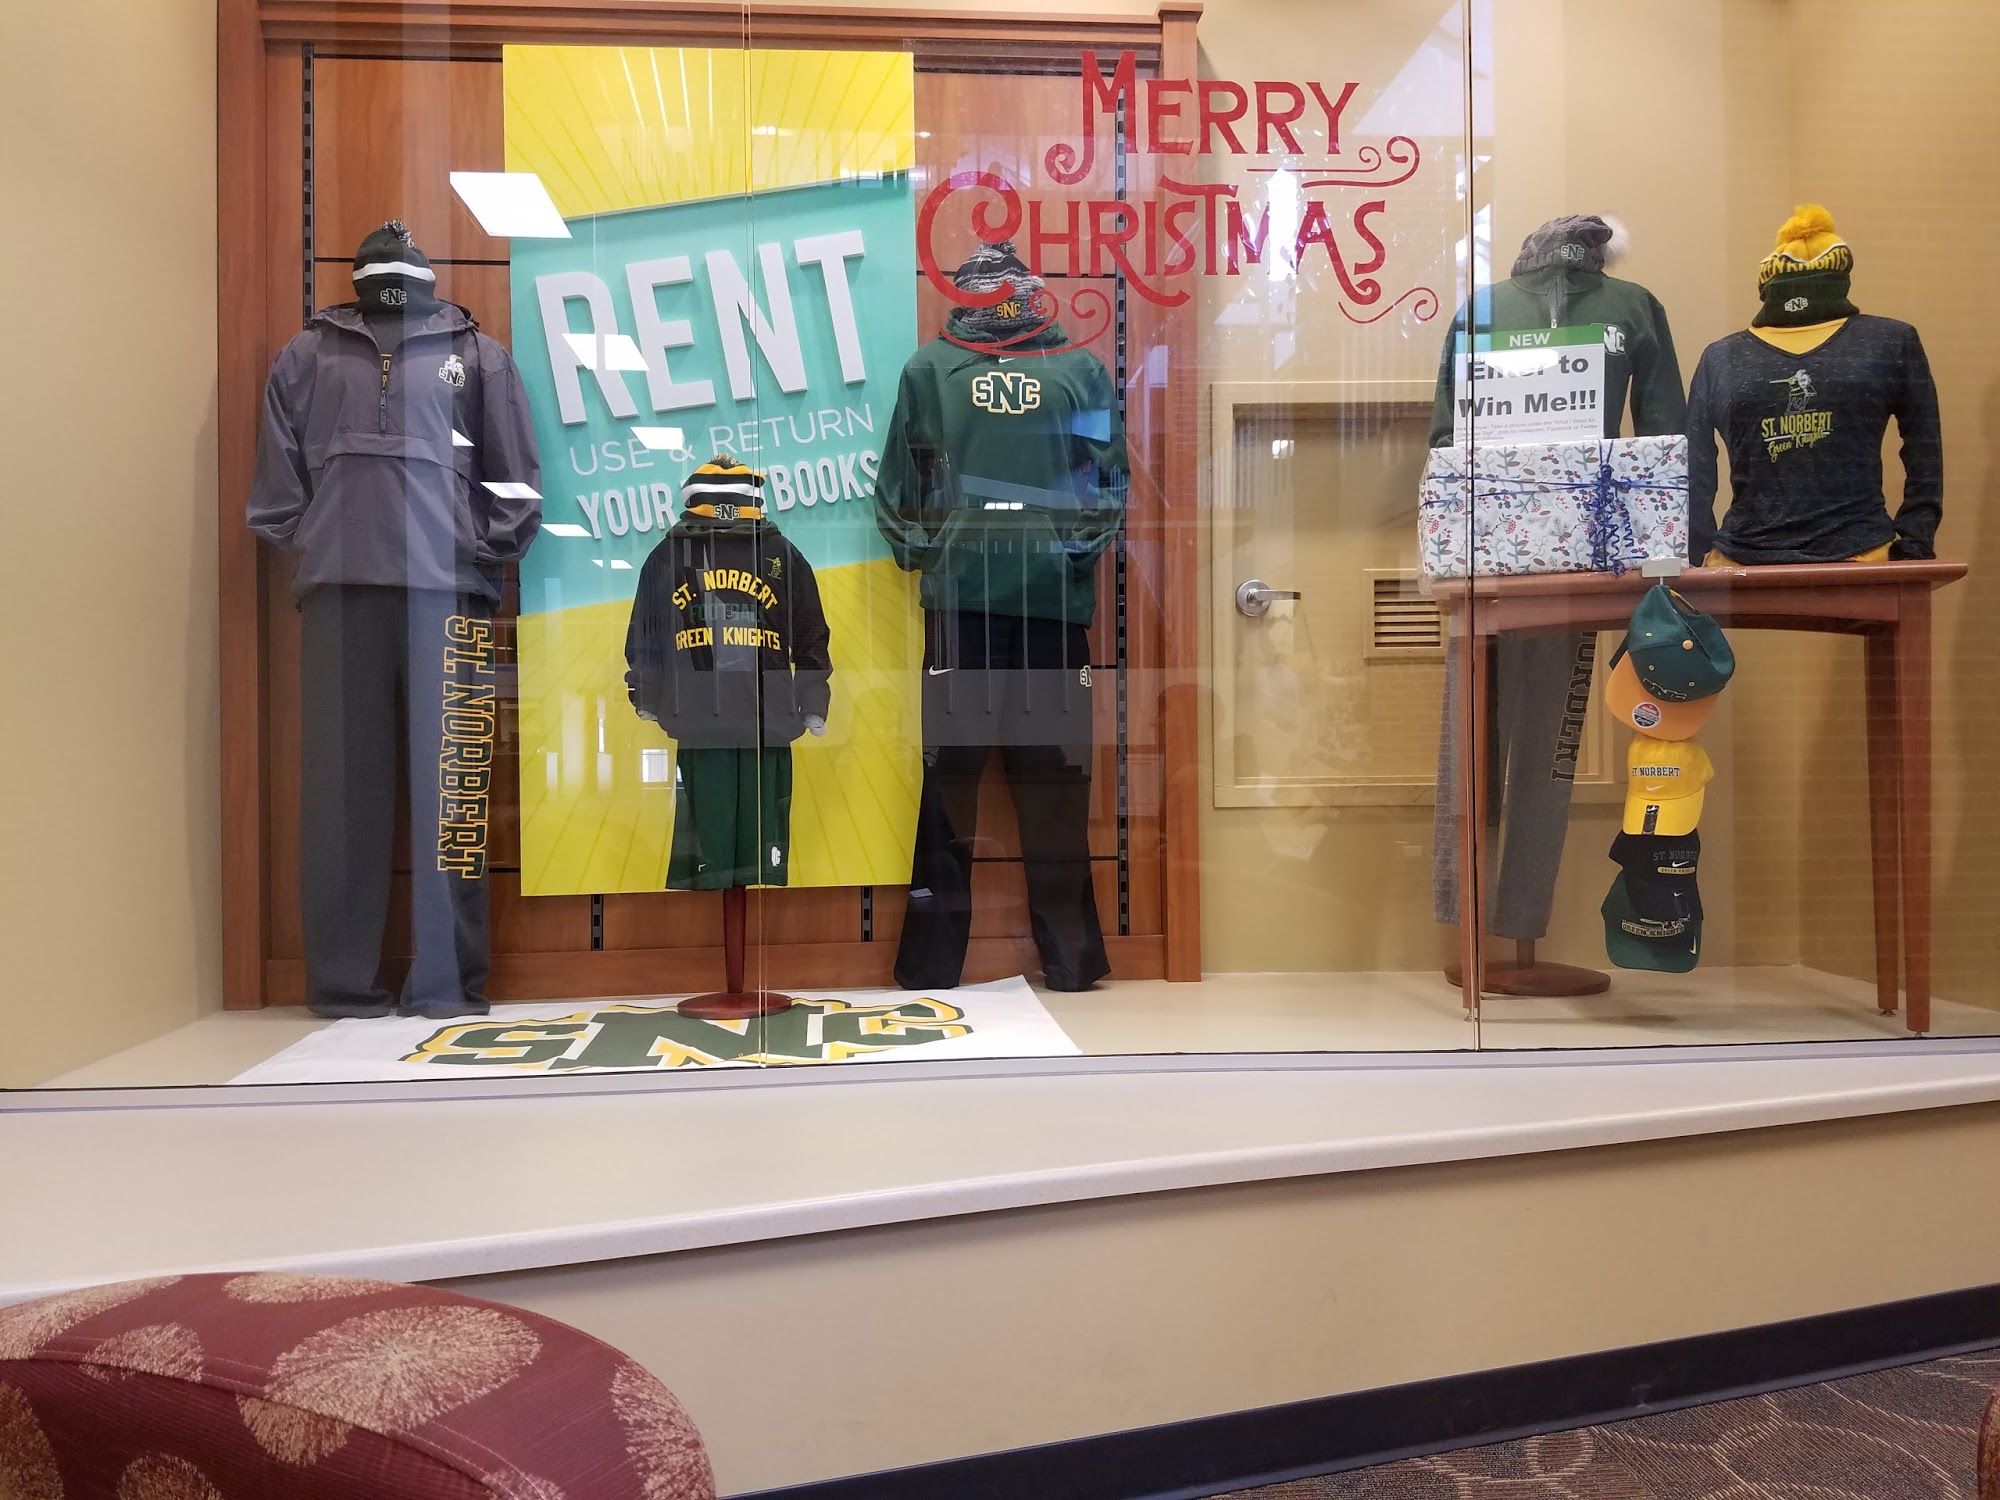 St. Norbert College Campus Store